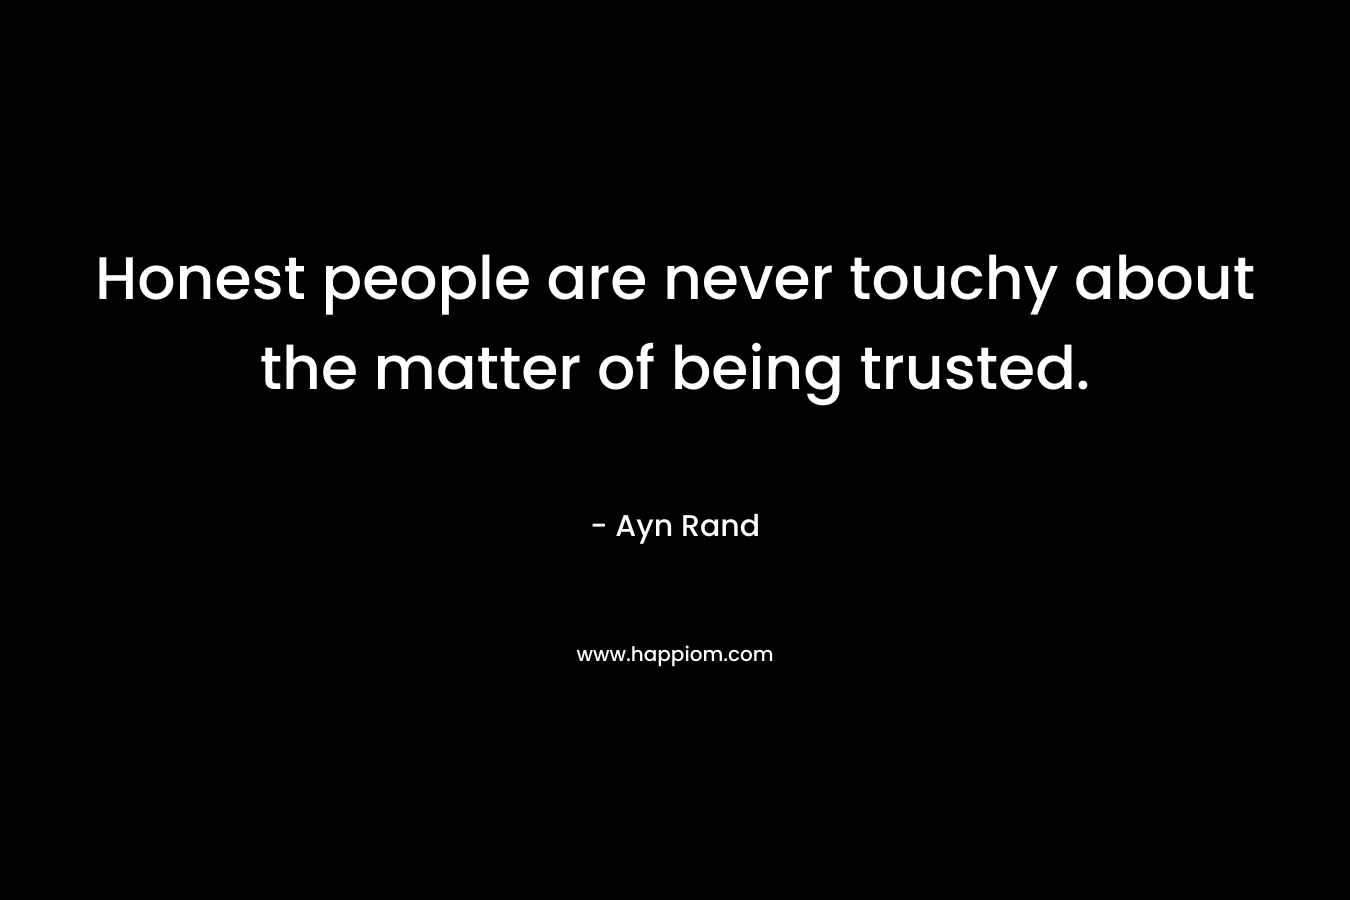 Honest people are never touchy about the matter of being trusted. – Ayn Rand